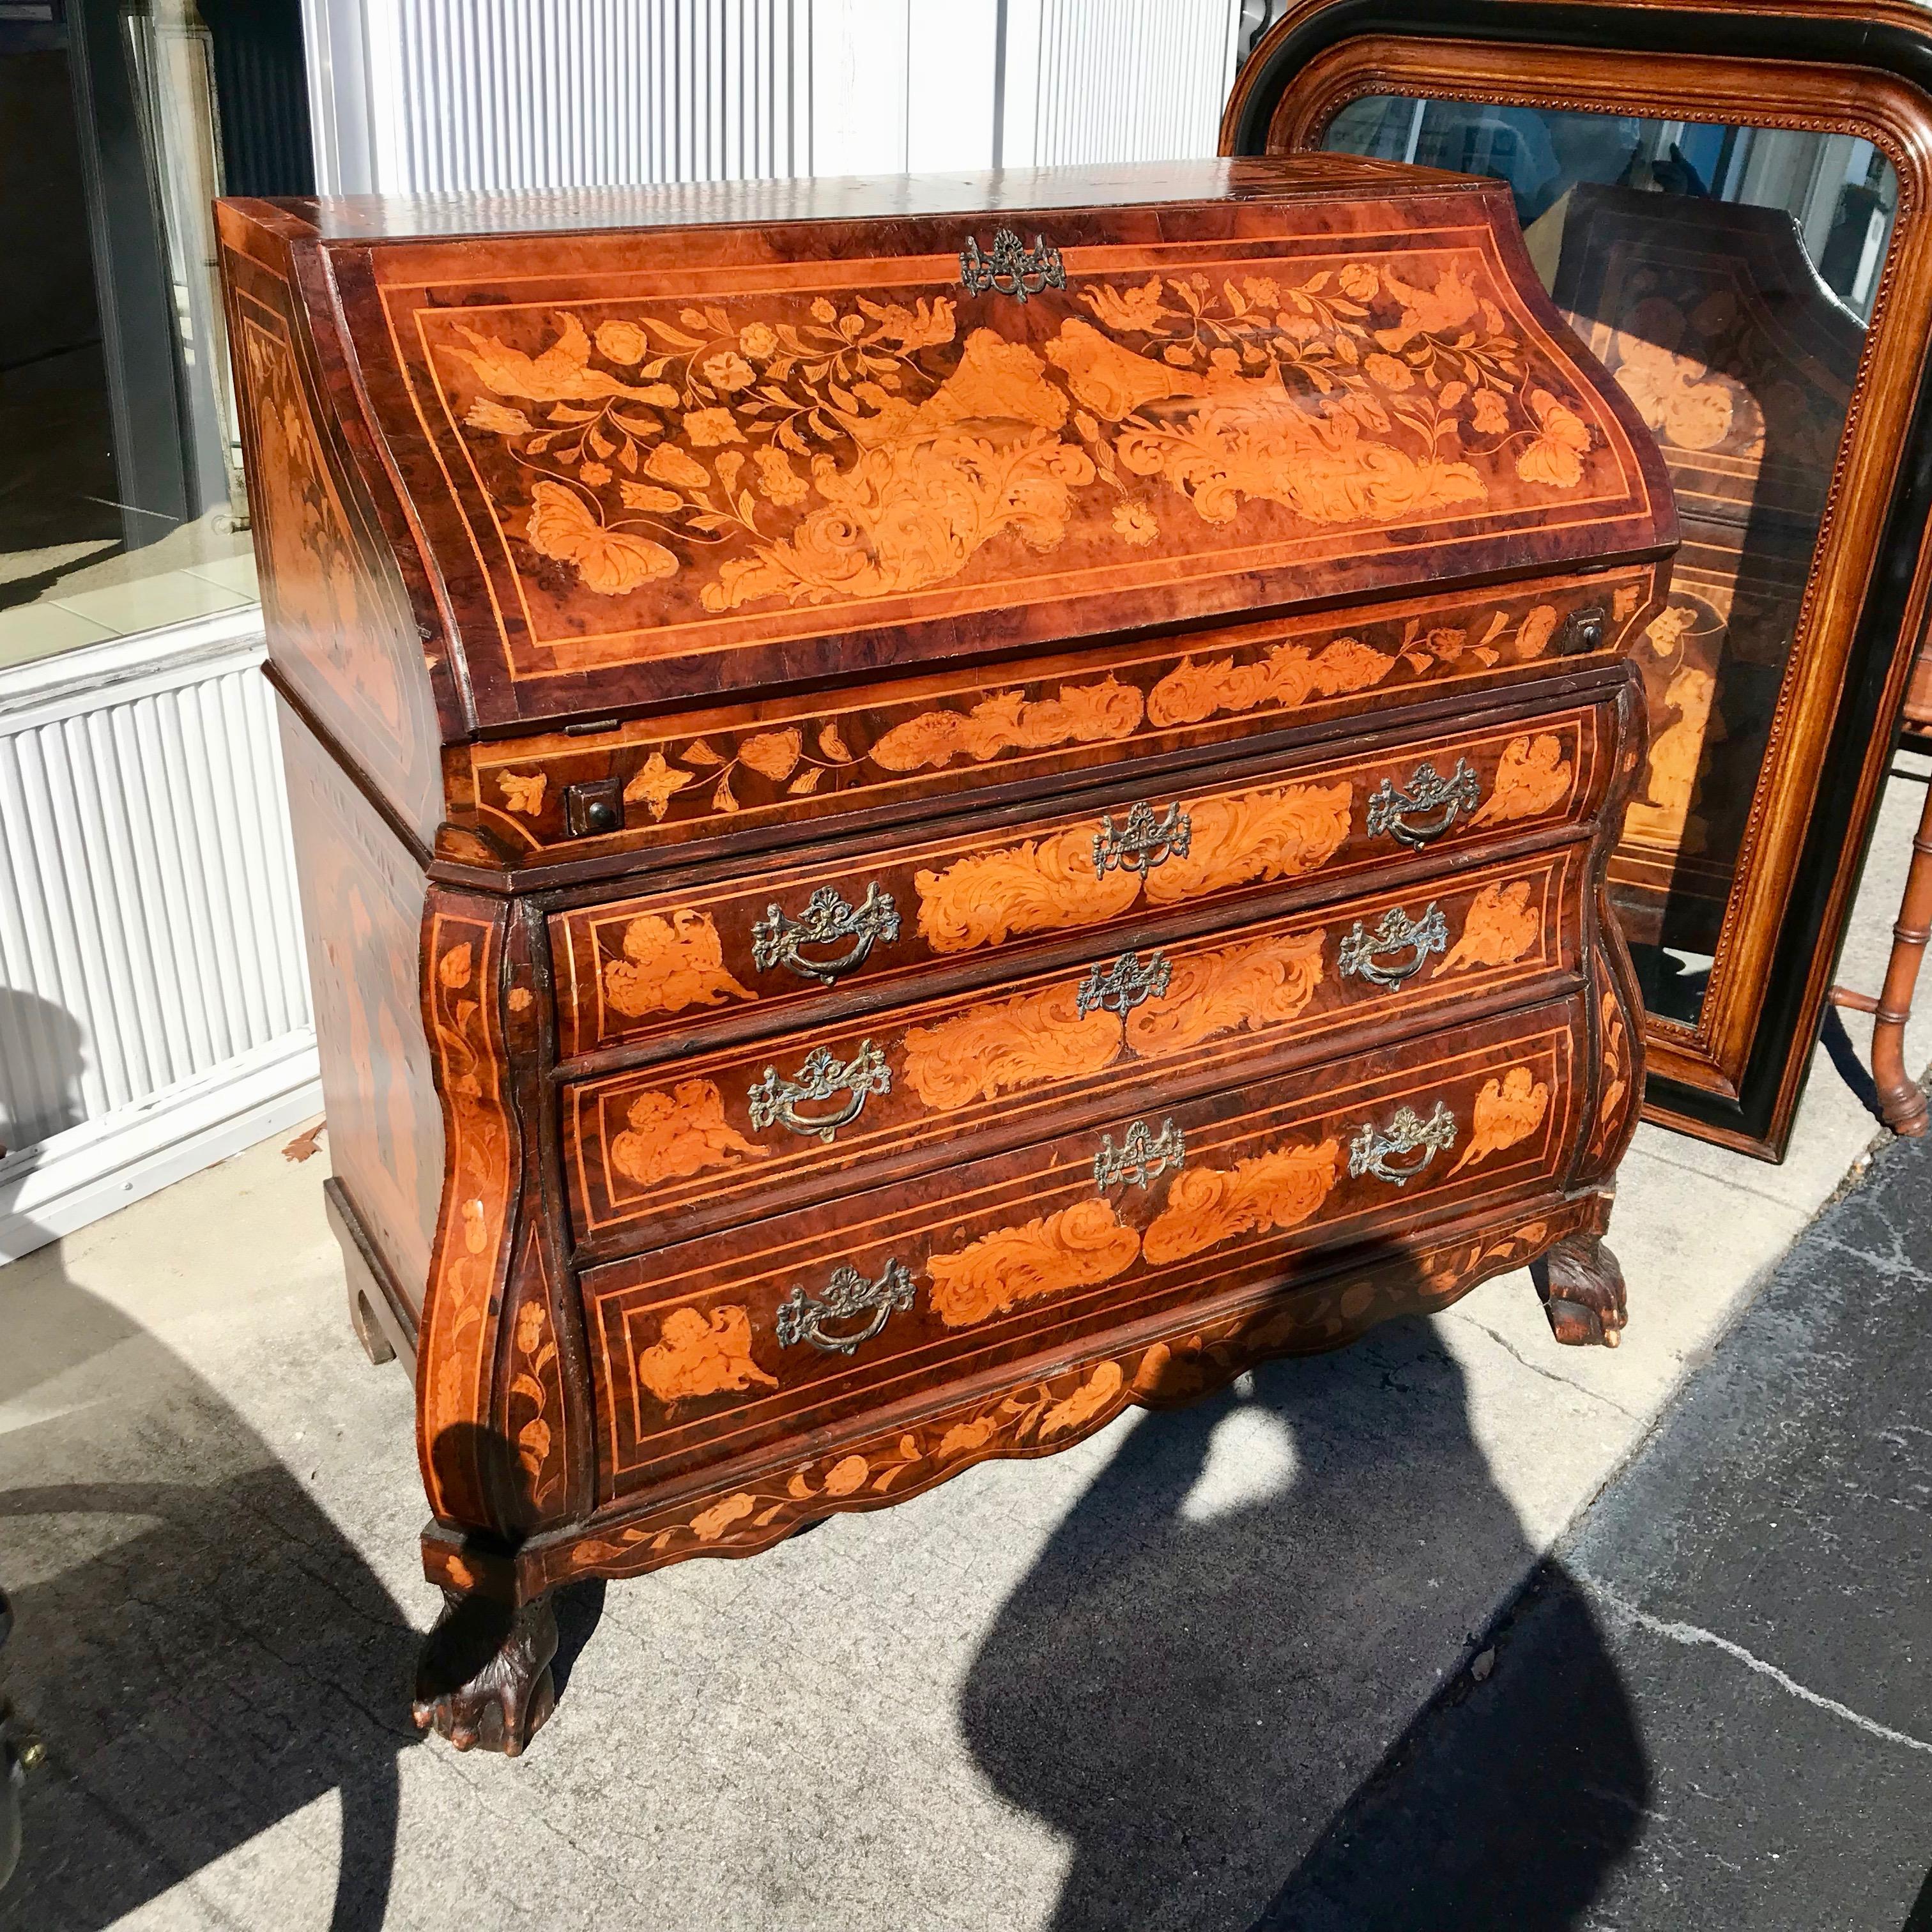 Generously scaled and proportioned with elaborate inlays inside and out -
- both figural and floral. Quality bombe' form.
The desk is raised upon paw feet.
A visually dramatic piece.